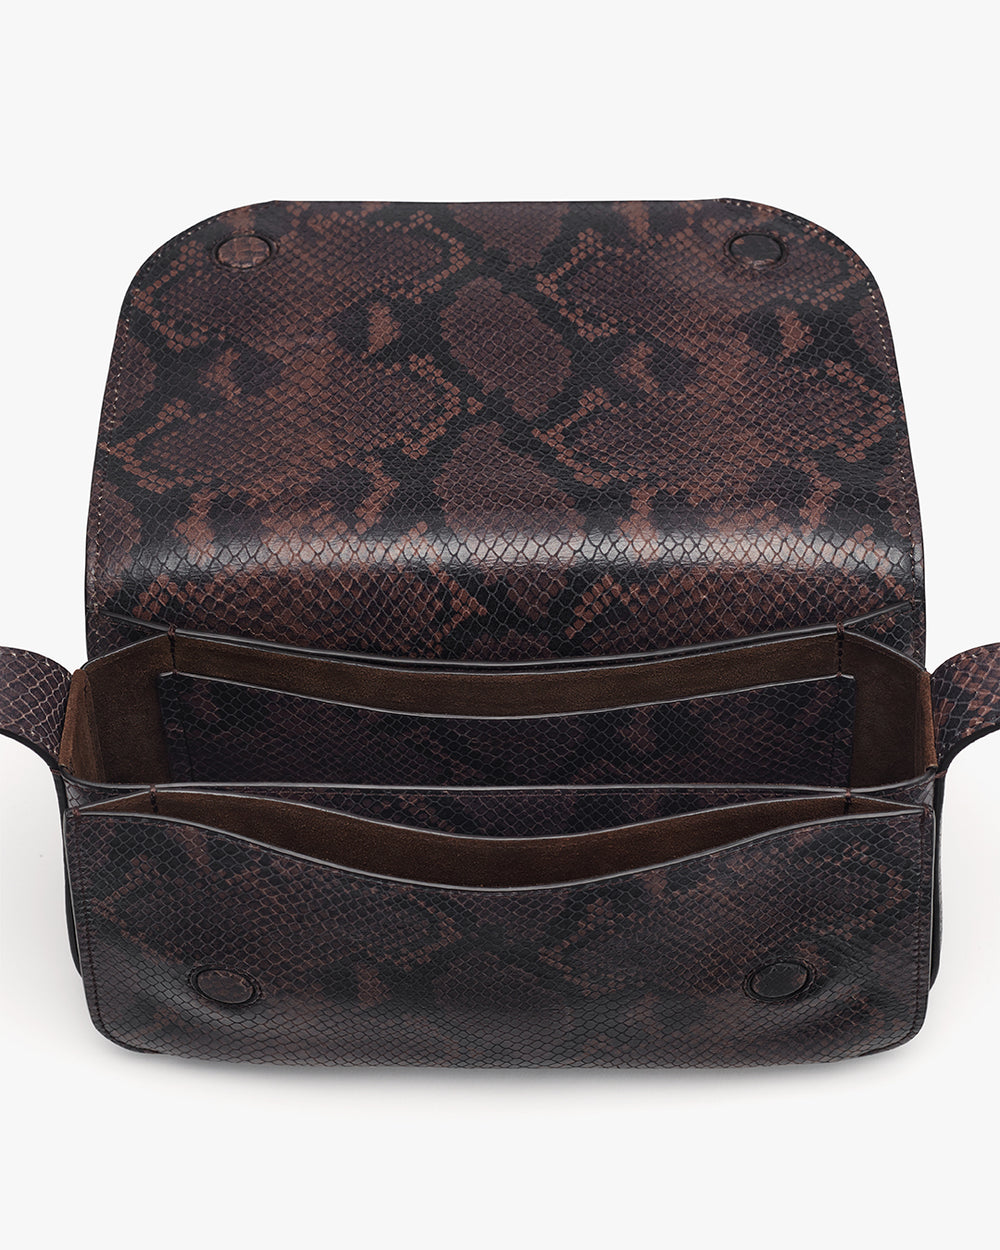 Open patterned backpack with multiple compartments